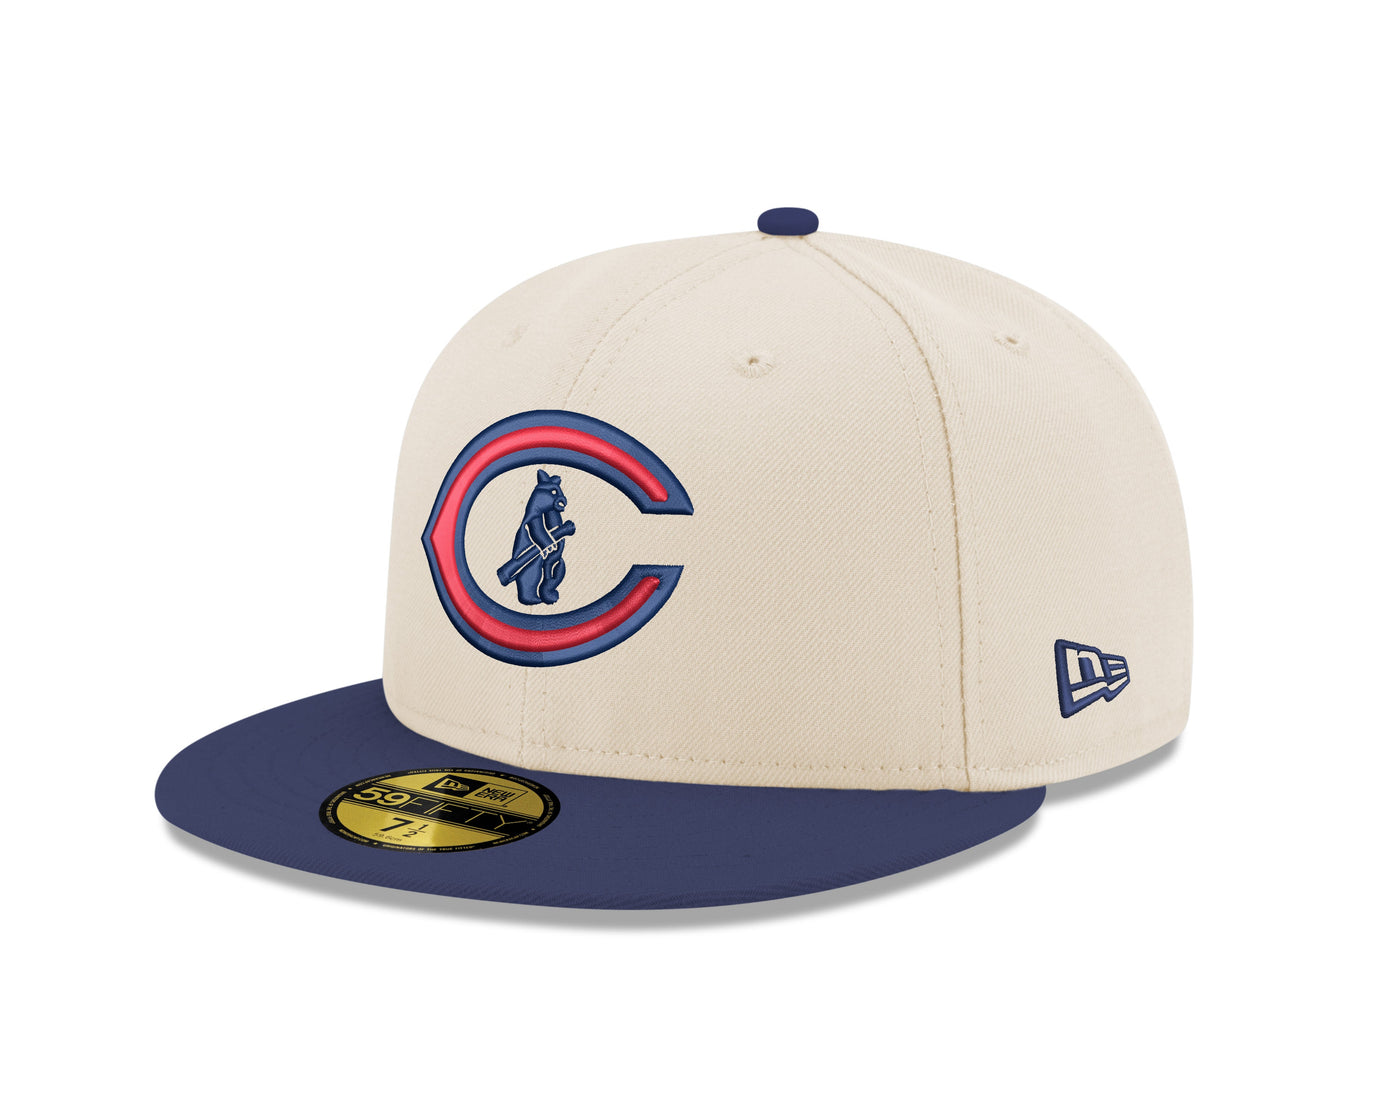 Field Of Dreams White Sox 59Fifty by New Era | Grandstand Ltd.